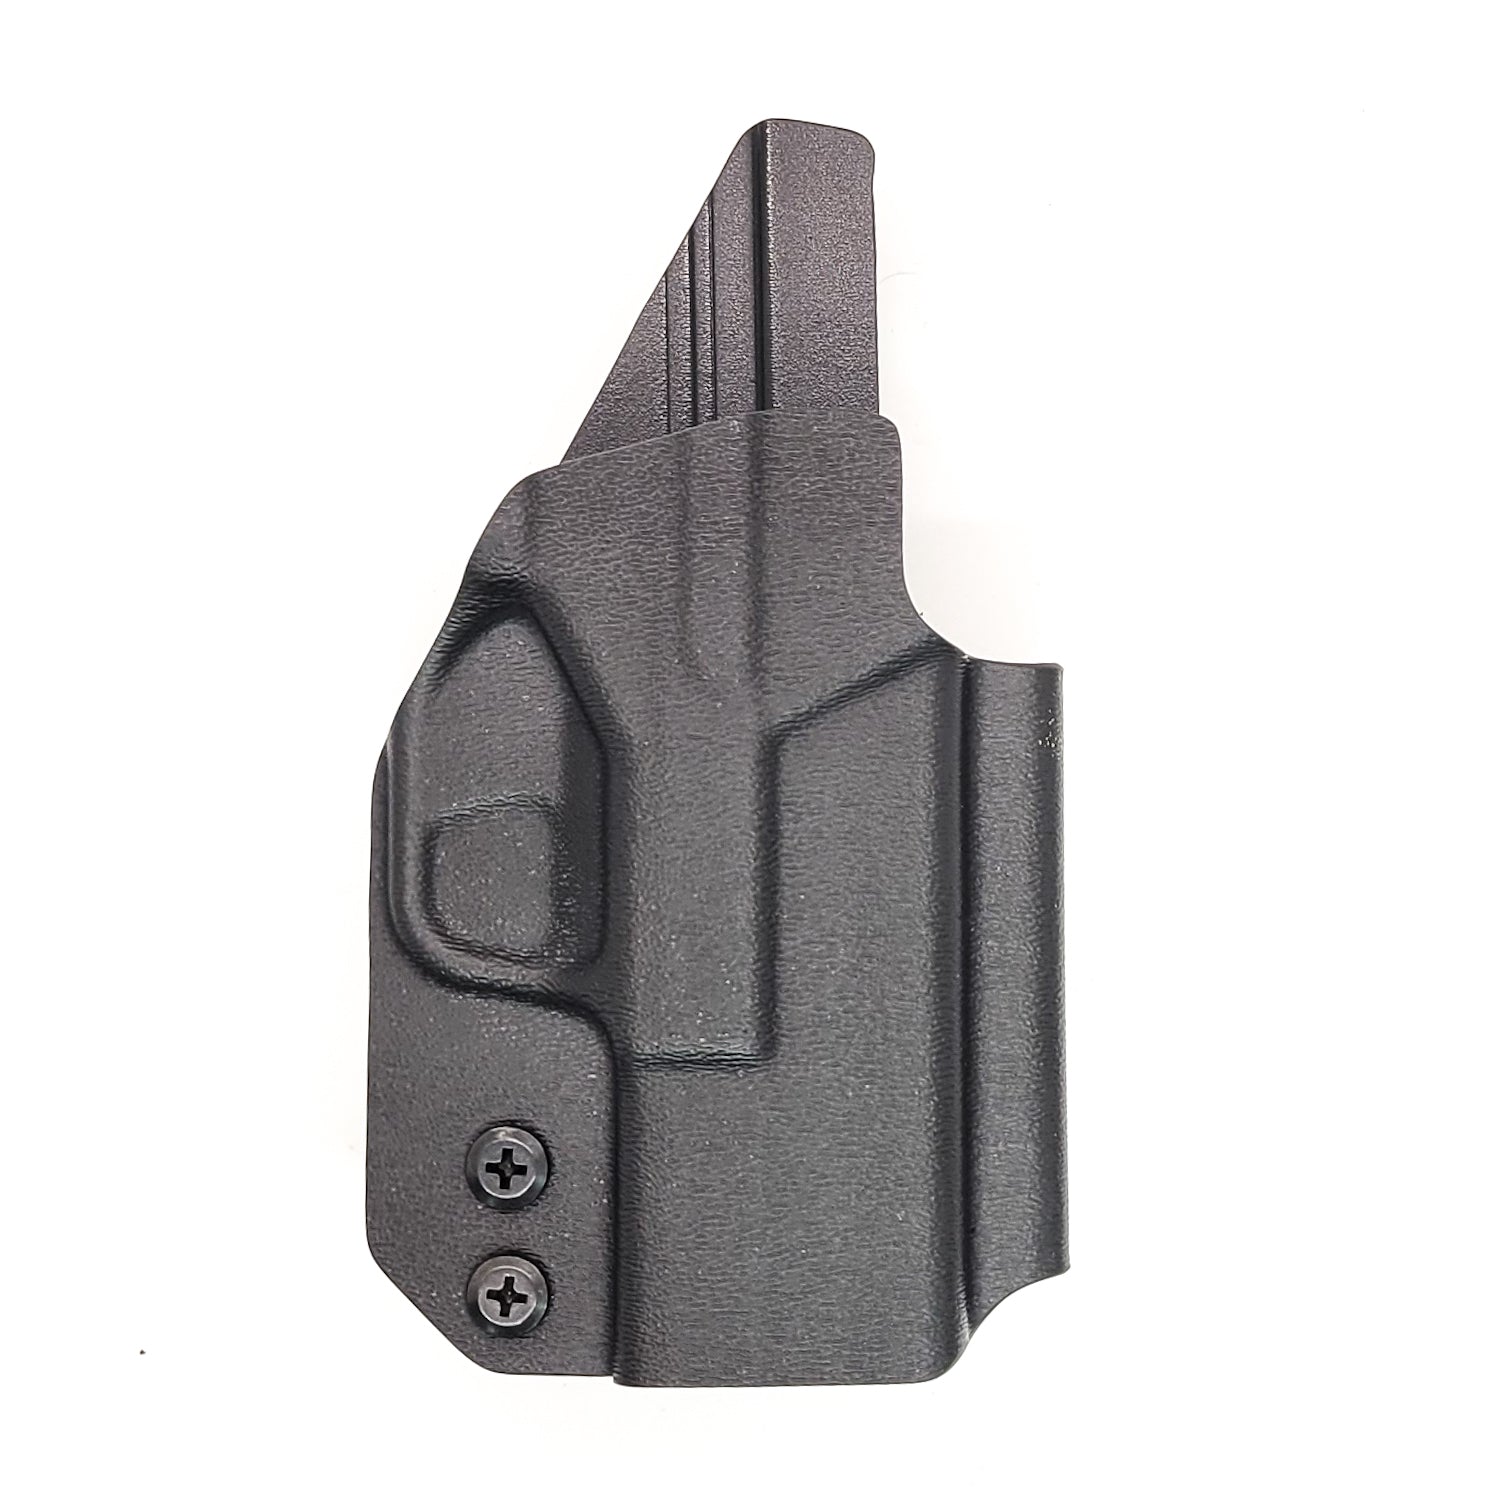 For the best OWB Outside Waistband Holster designed to fit the Springfield Armory Hellcat, shop Four Brothers Holters. Cleared for a red dot sight mounted to the pistol. Full sweat guard, adjustable retention, minimal material, and smooth edges to reduce printing. Proudly made in the USA.